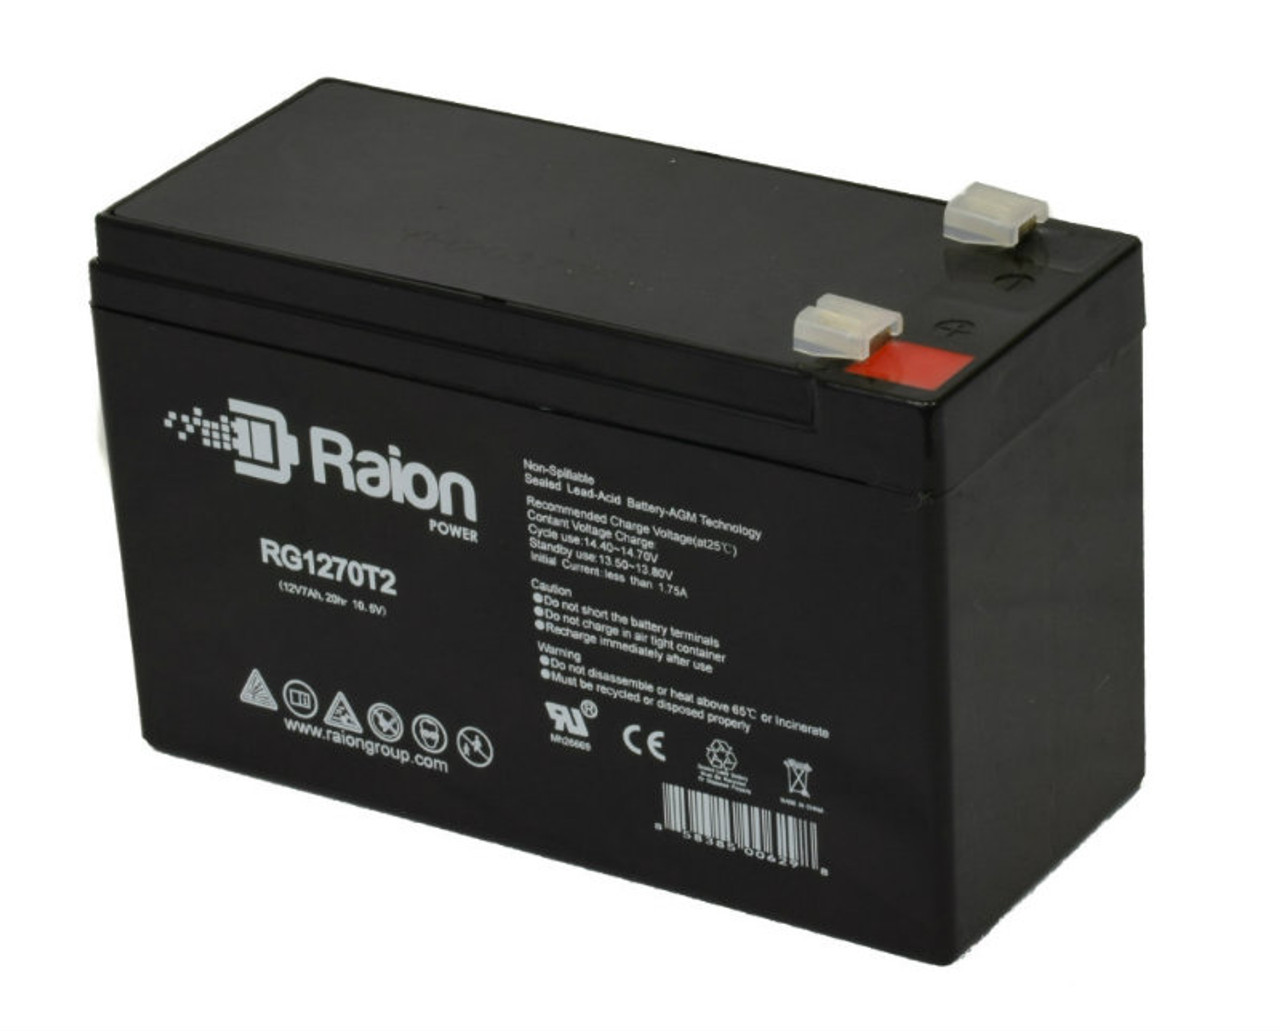 Raion Power RG1270T1 12V 7Ah Non-Spillable Replacement Battery for Leadhoo NP7-12